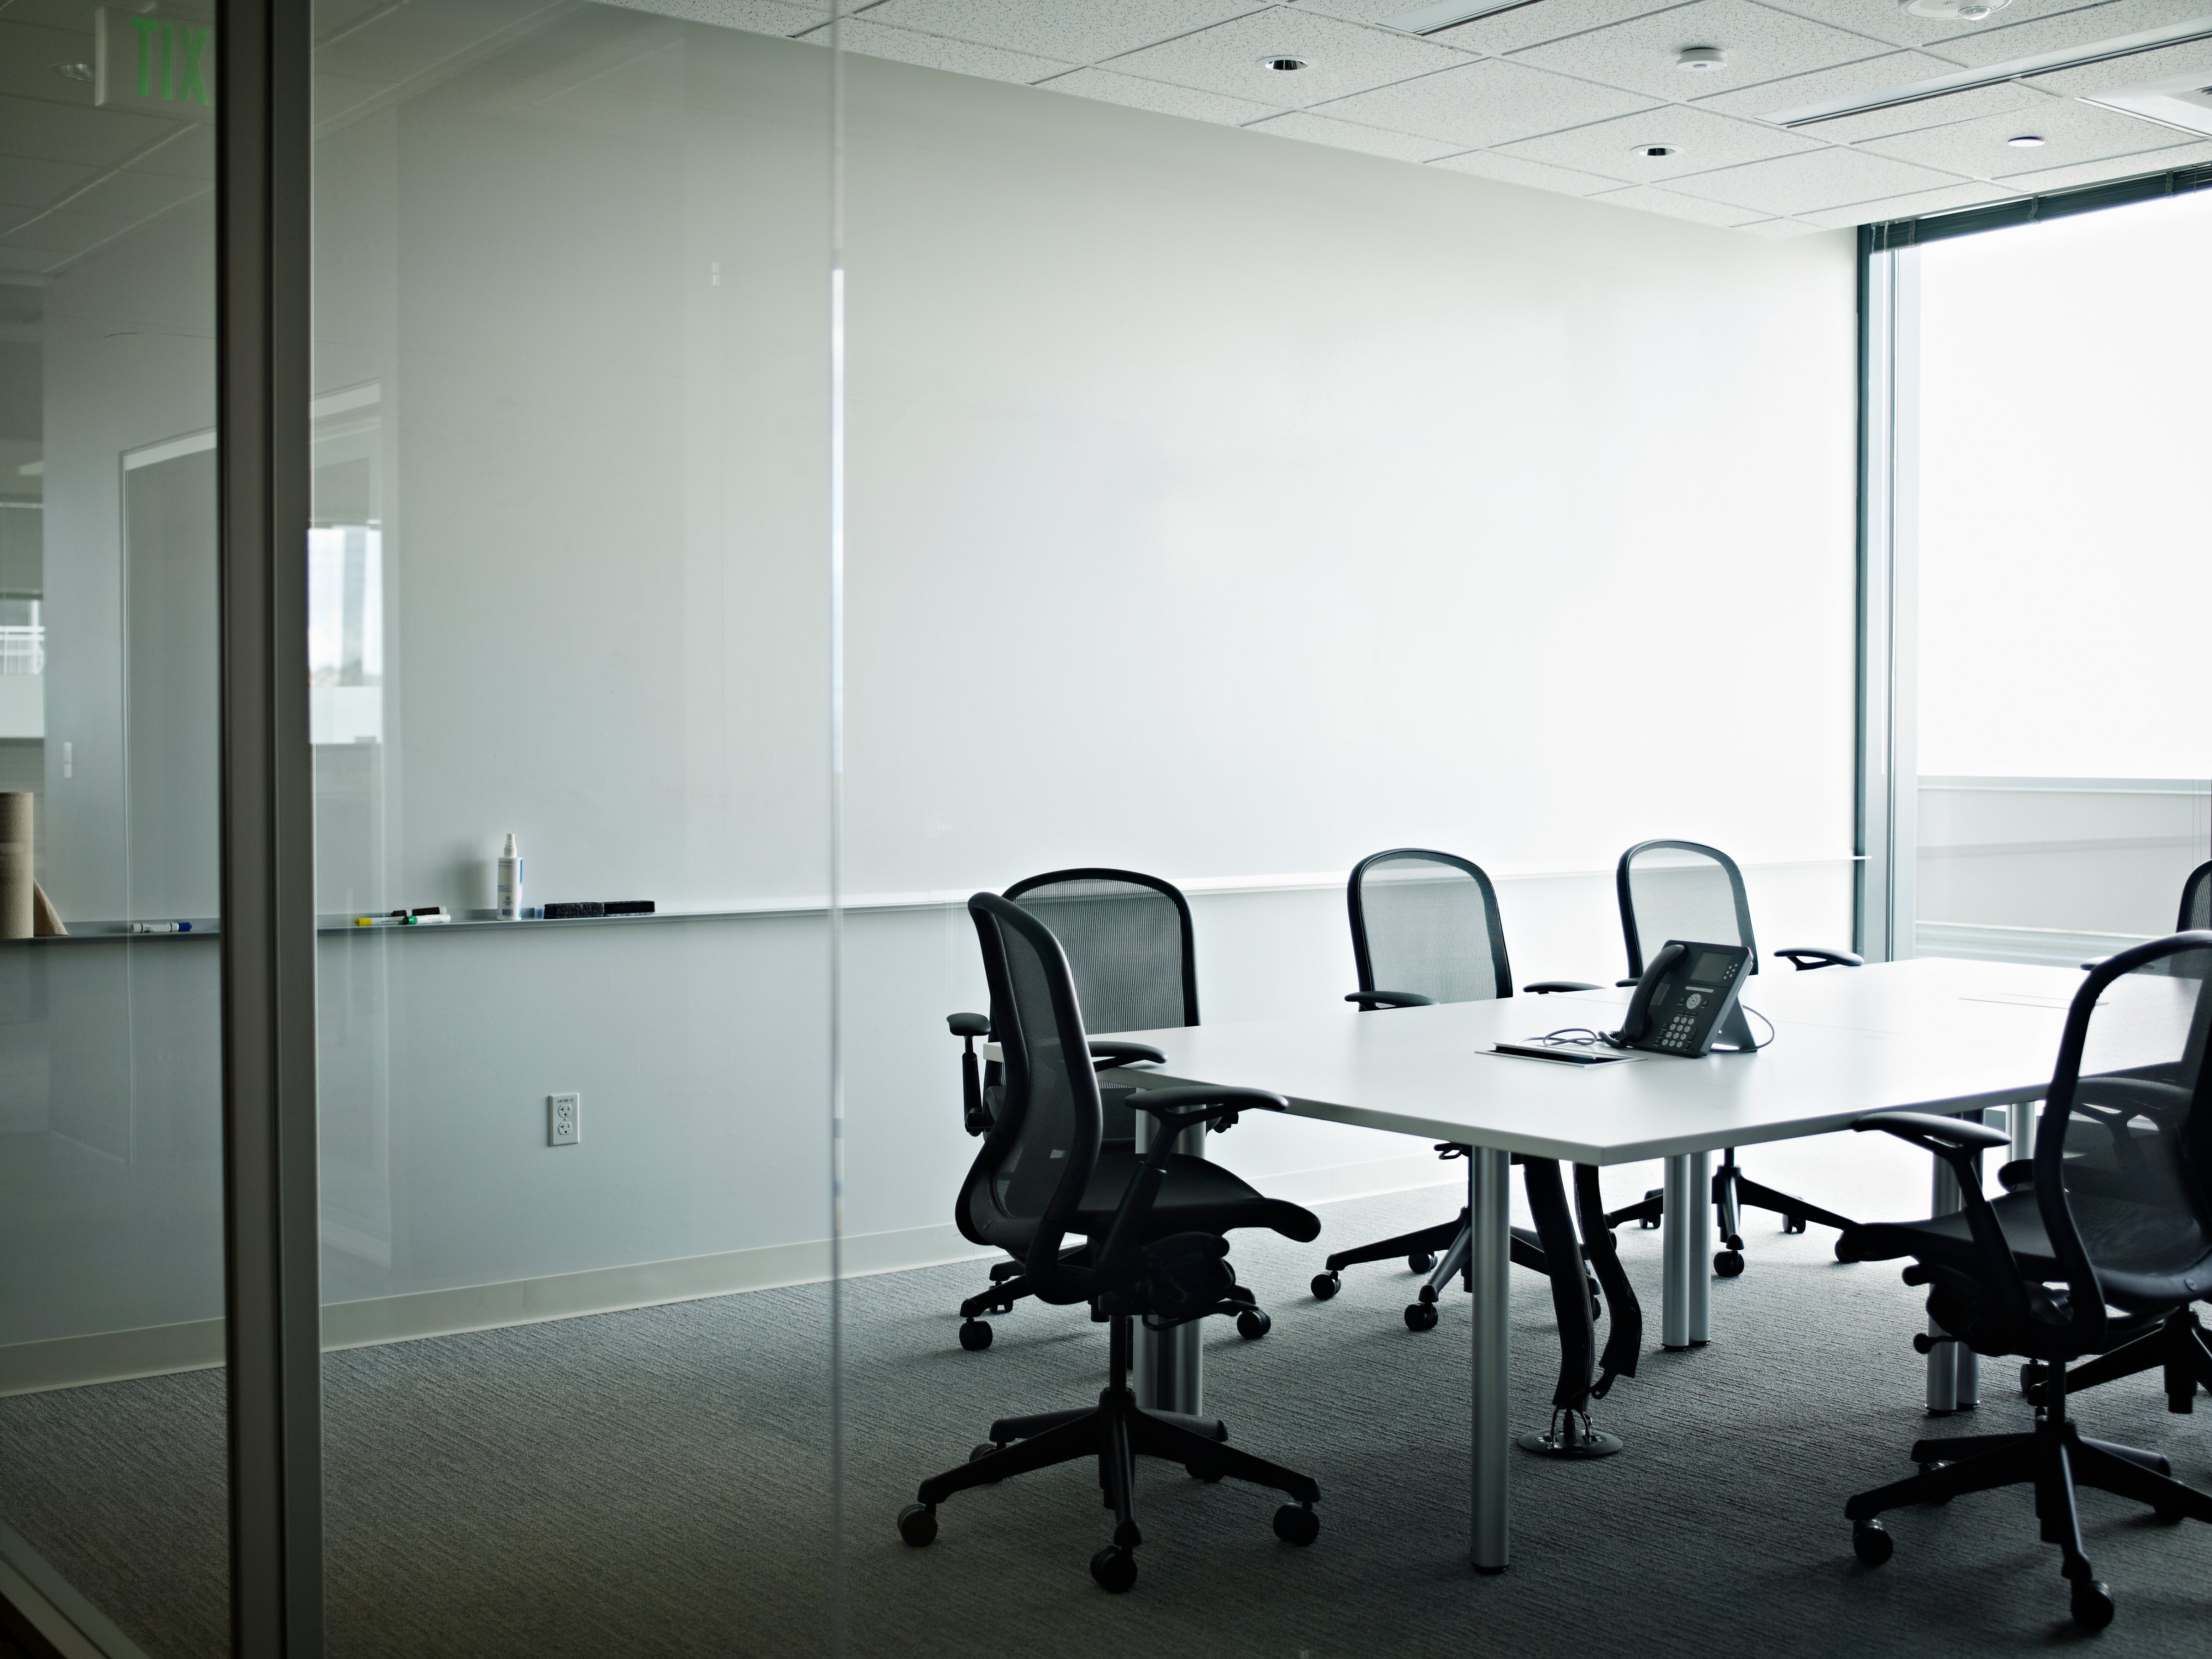 Empty office conference room (Thomas Barwick—Getty Images)